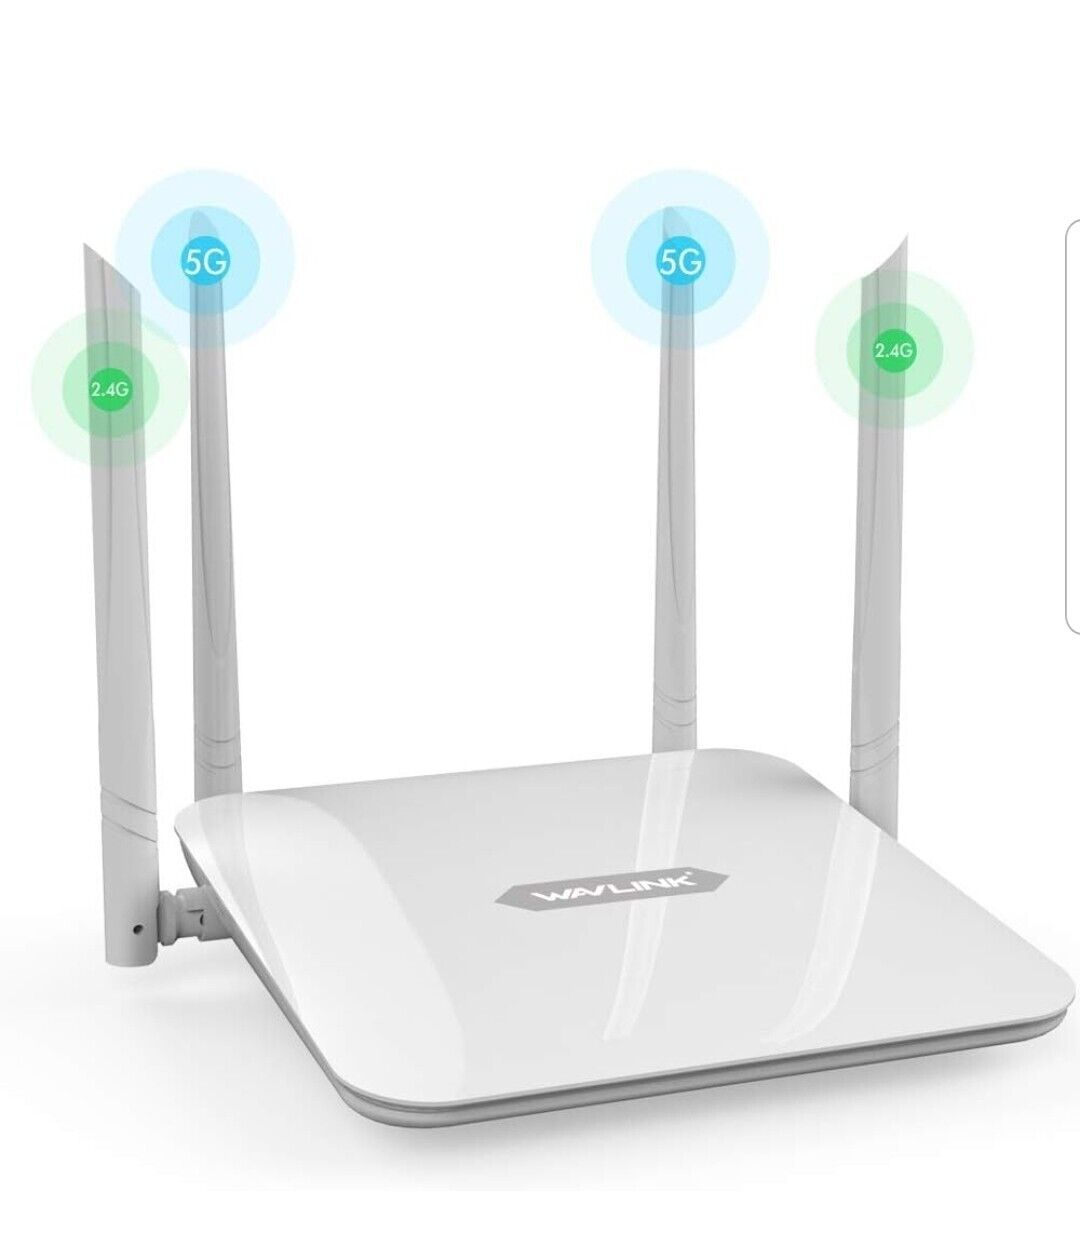 WAVLINK AC1200 DUAL-BAND GIGABIT WI-FI ROUTER AERIAL G2 [NEW OPEN BOX] 